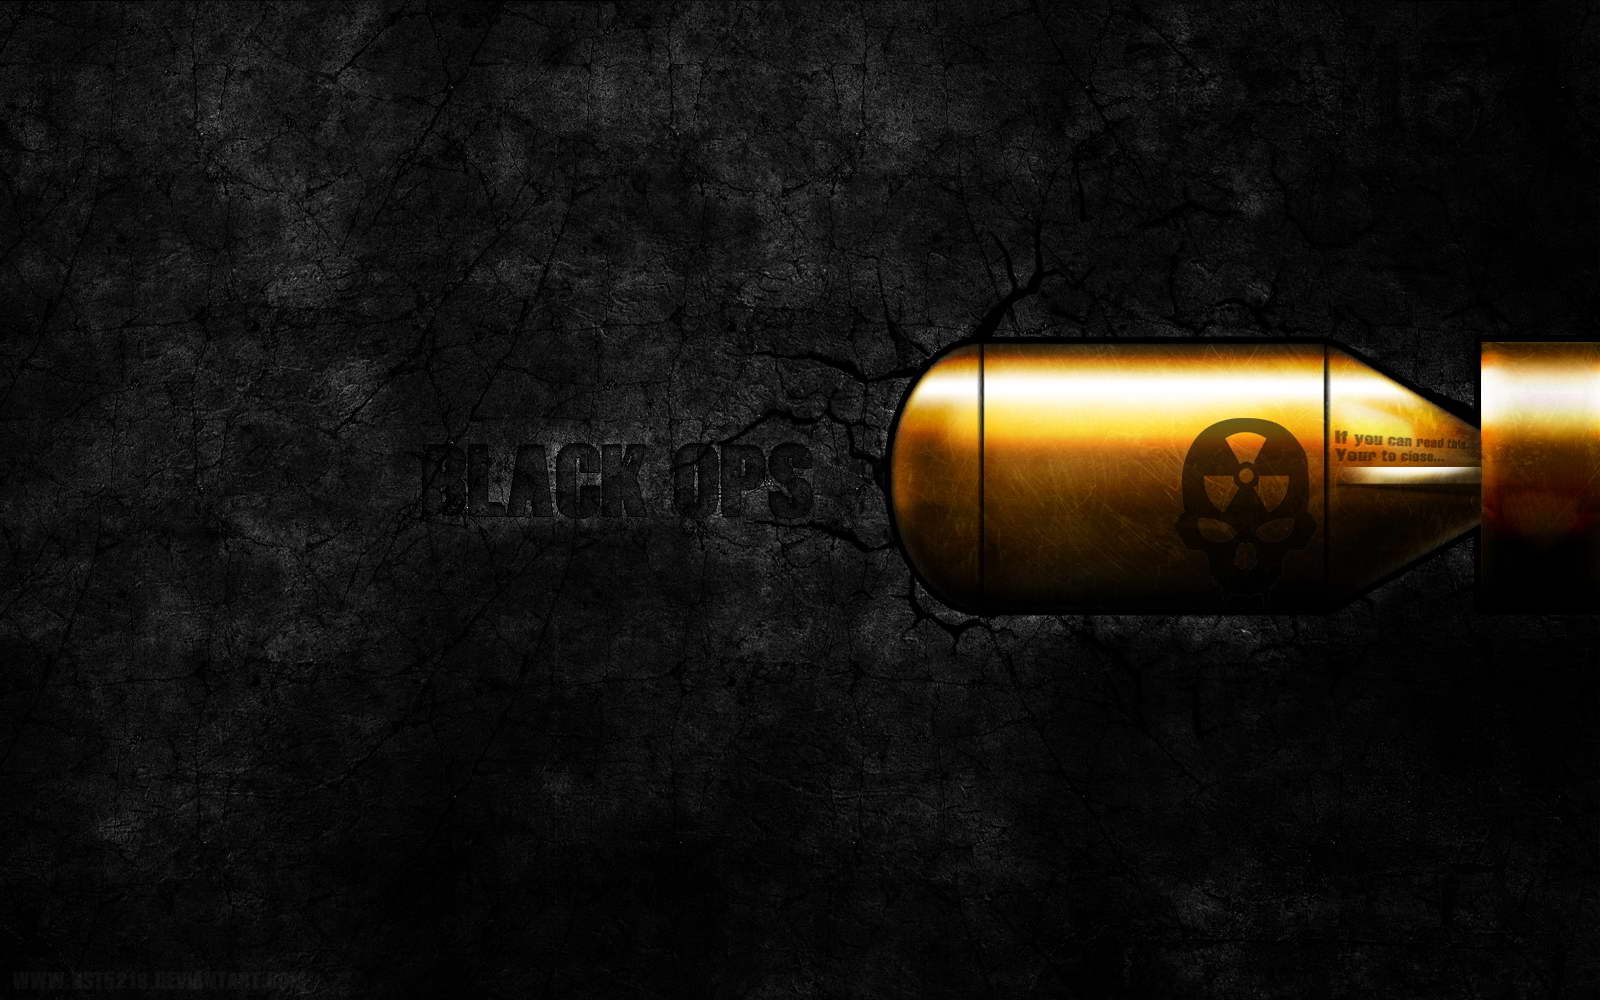 Black Ops 2 5012 Hd Wallpapers in Games   Imagescicom 1600x1000